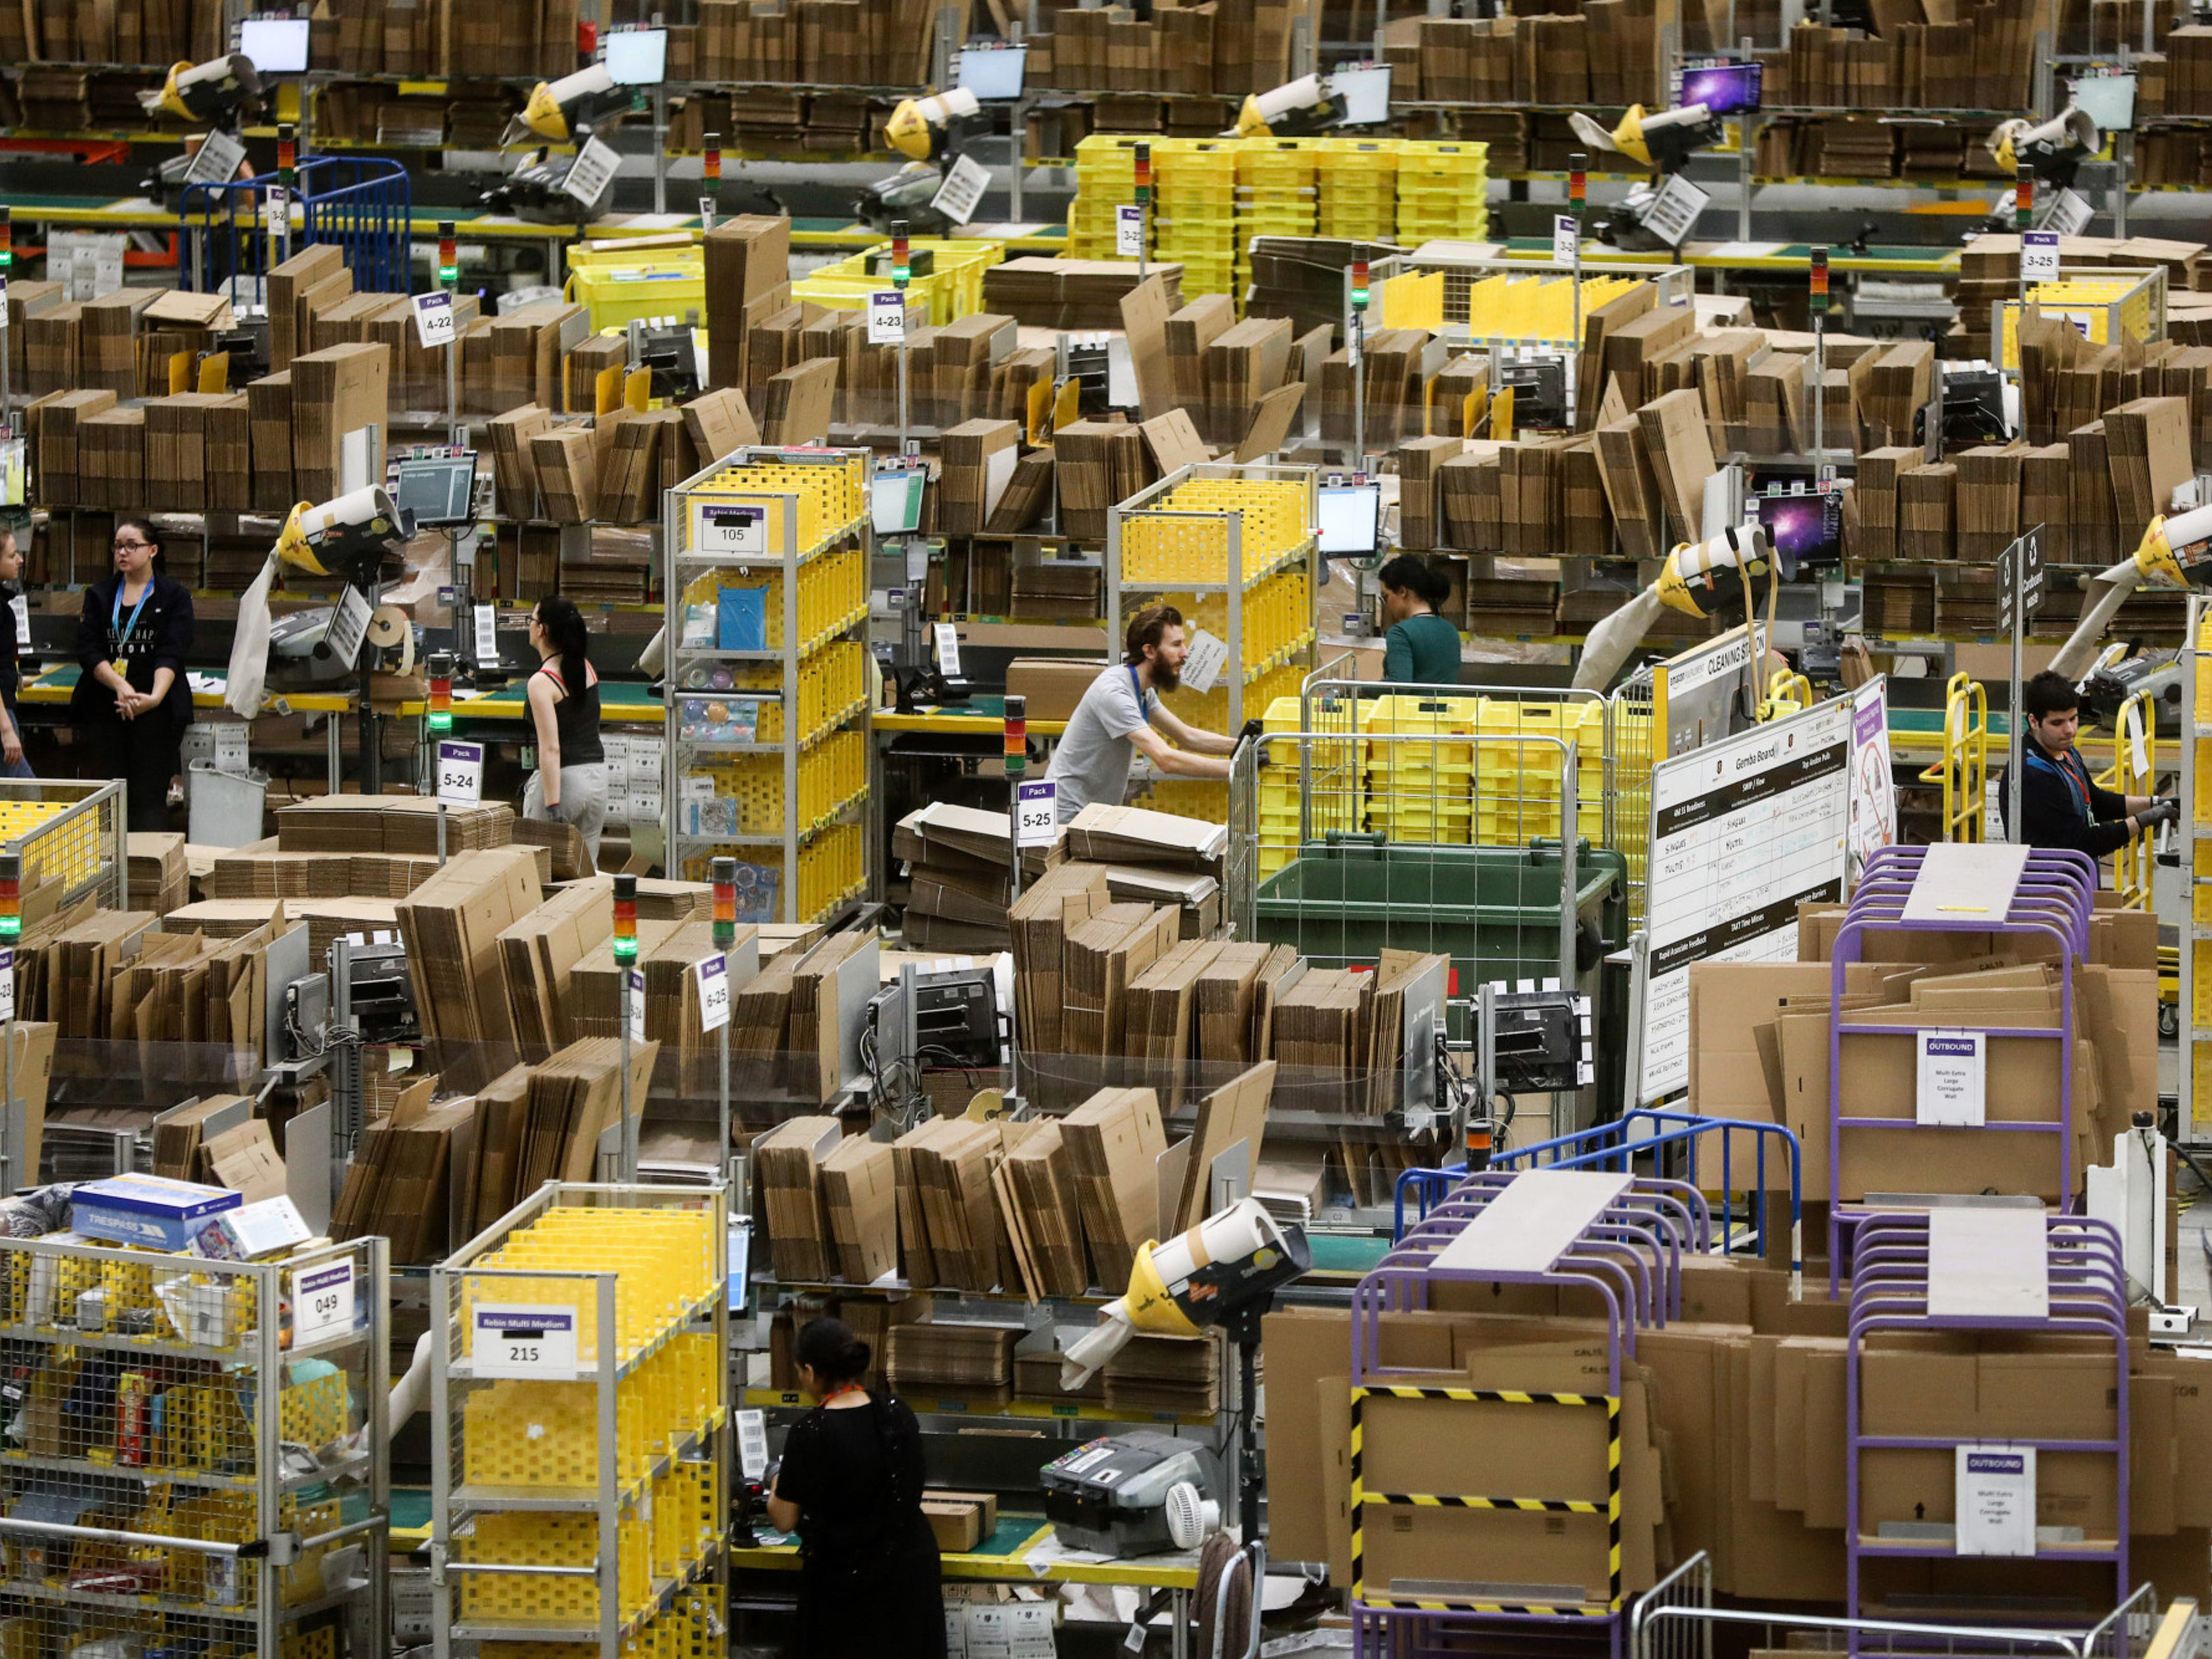 The Amazonification of Supply Chains